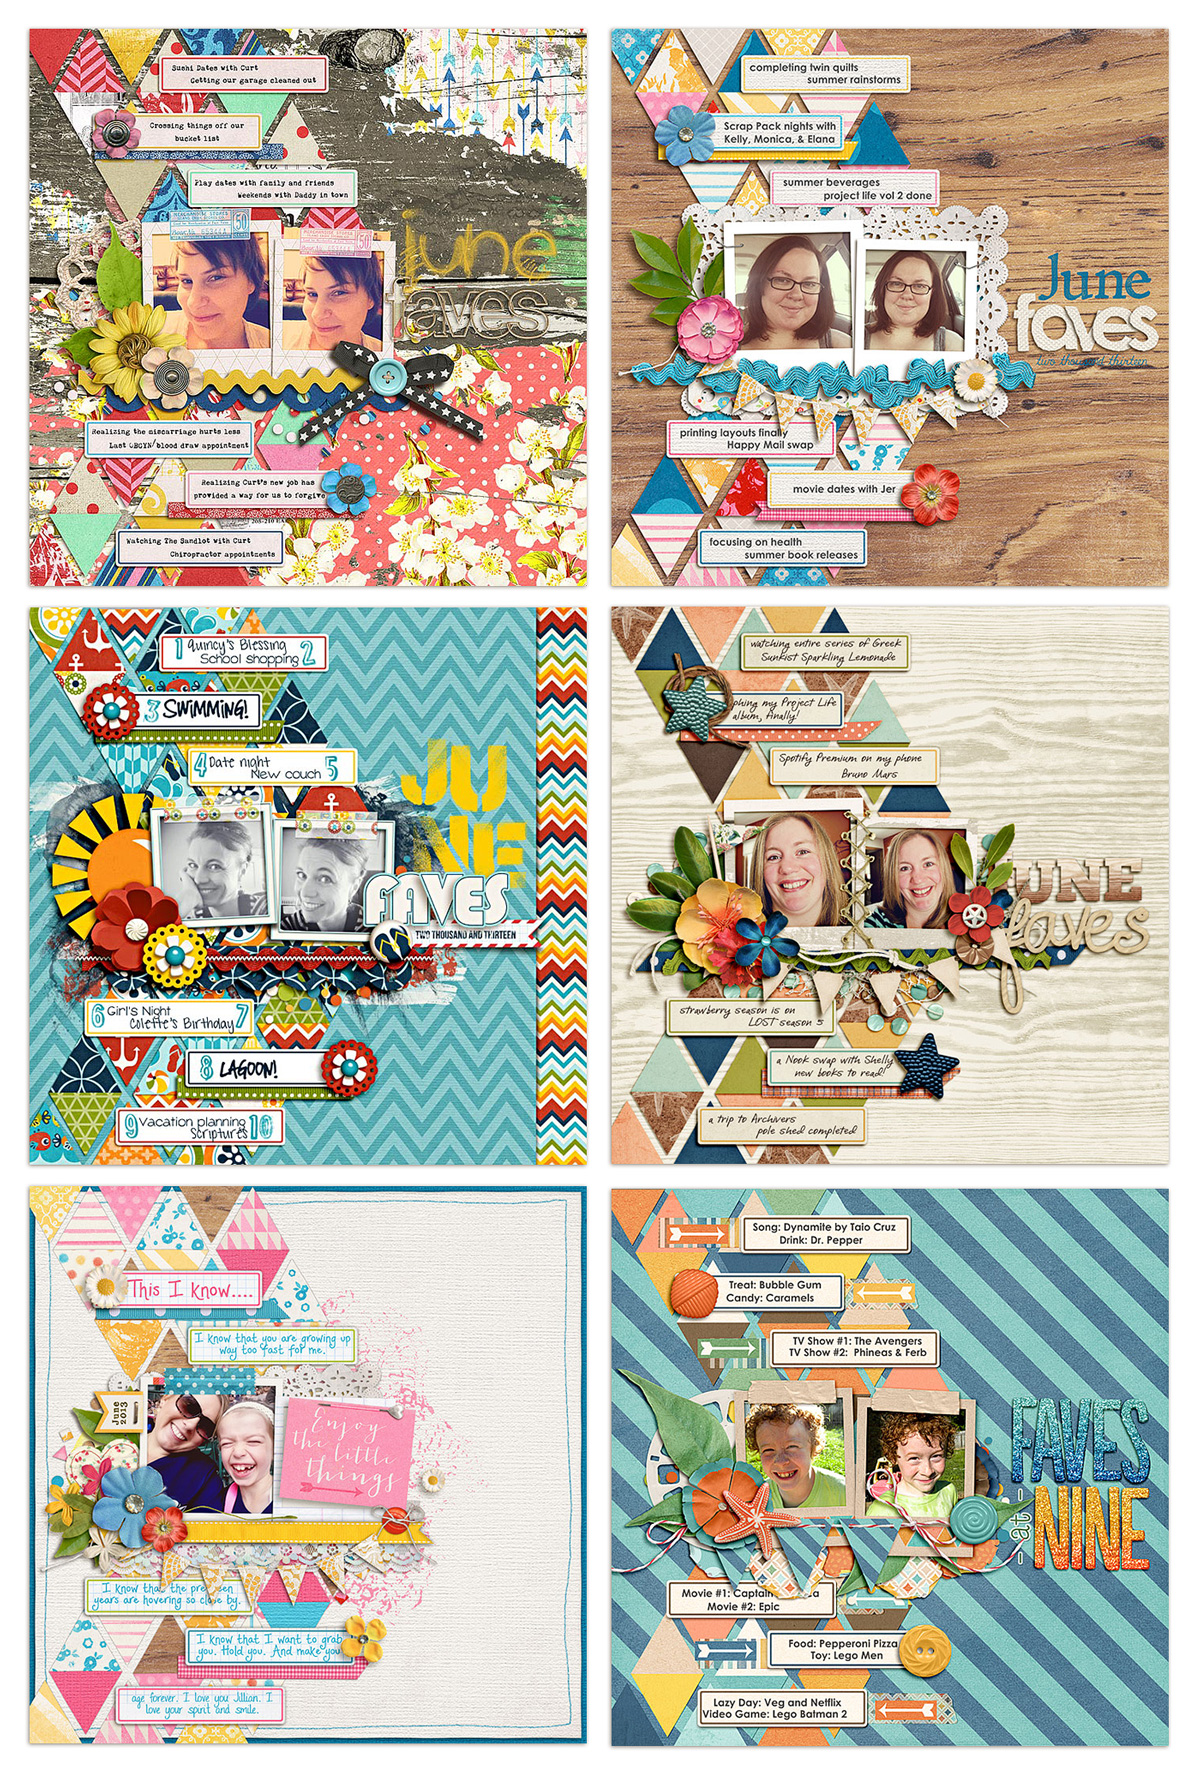 nettiodesigns_news-CTLayouts-JunFaves